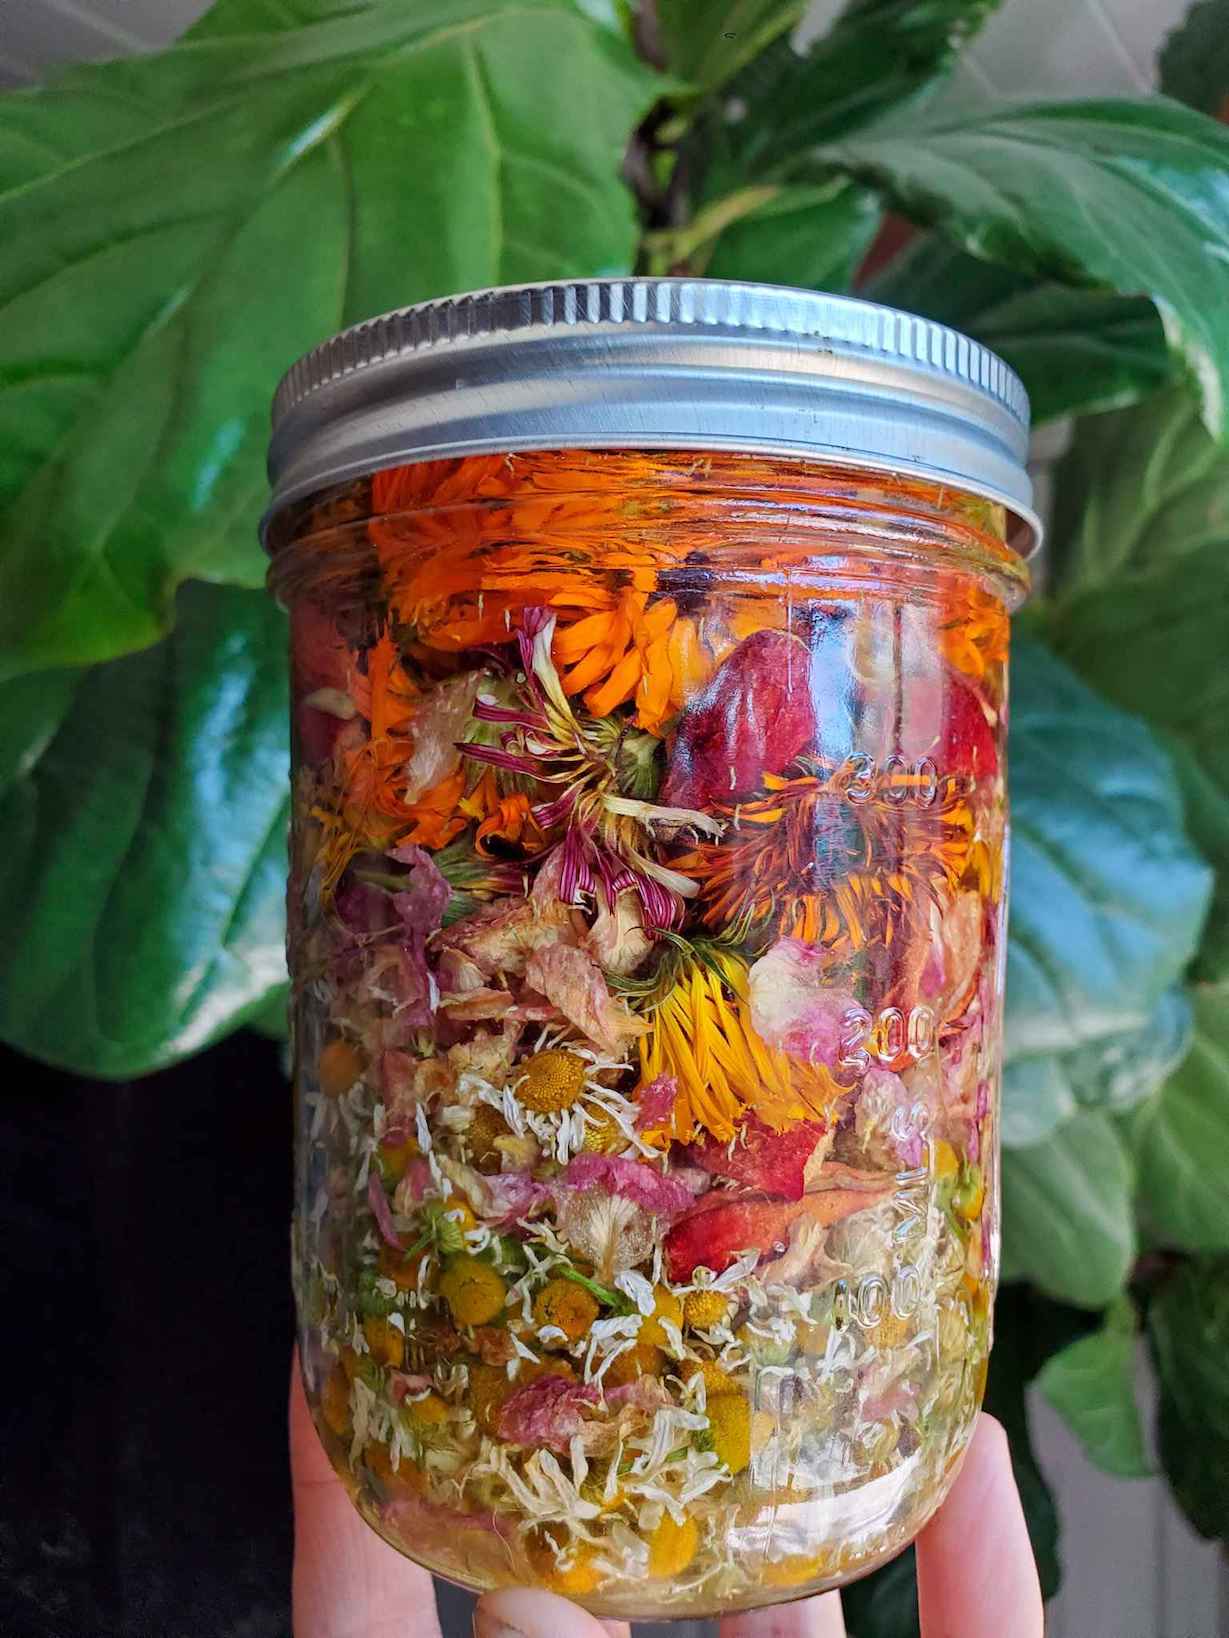 An herbal oil infusion inside a pint sized mason jar contains chamomile flowers, calendula flowers, and rose petals.